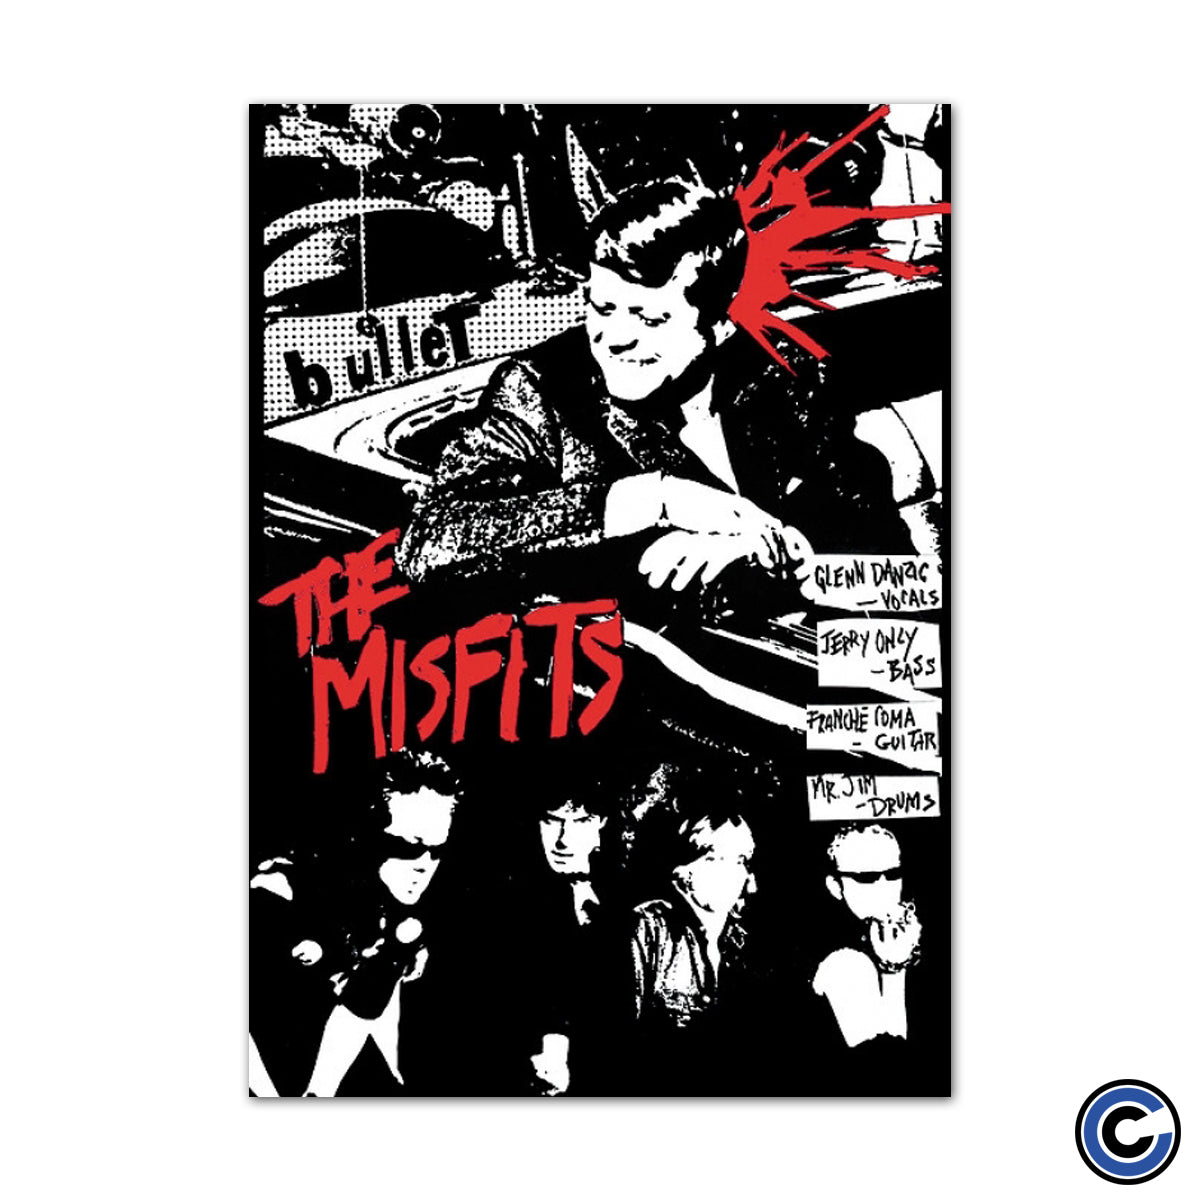 Misfits "Kennedy" Poster